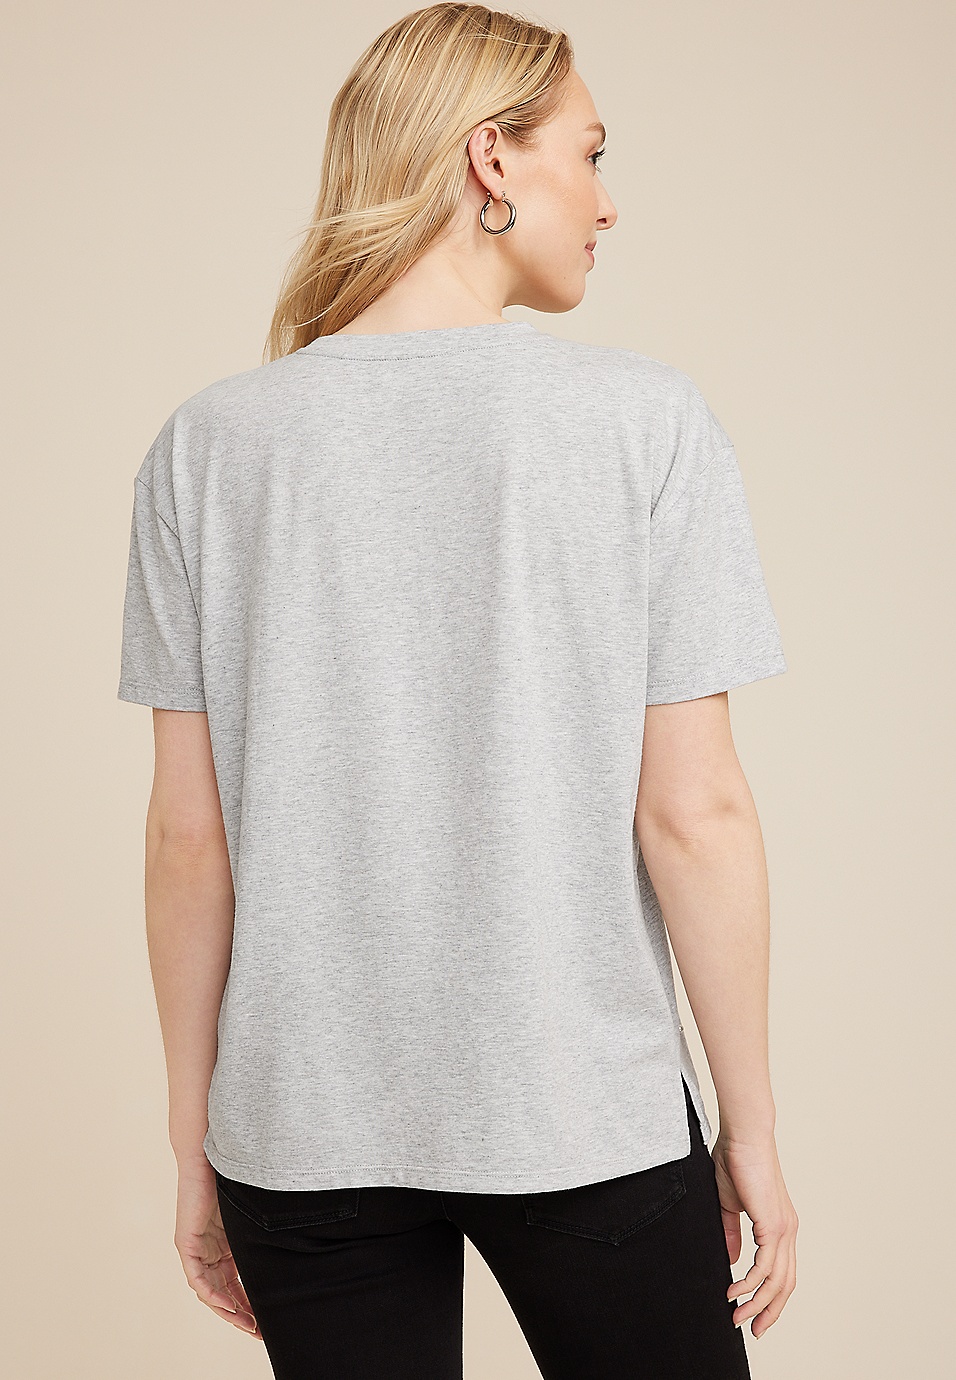 maurices Pearl Embellished | Crew Tee Neck edgely™